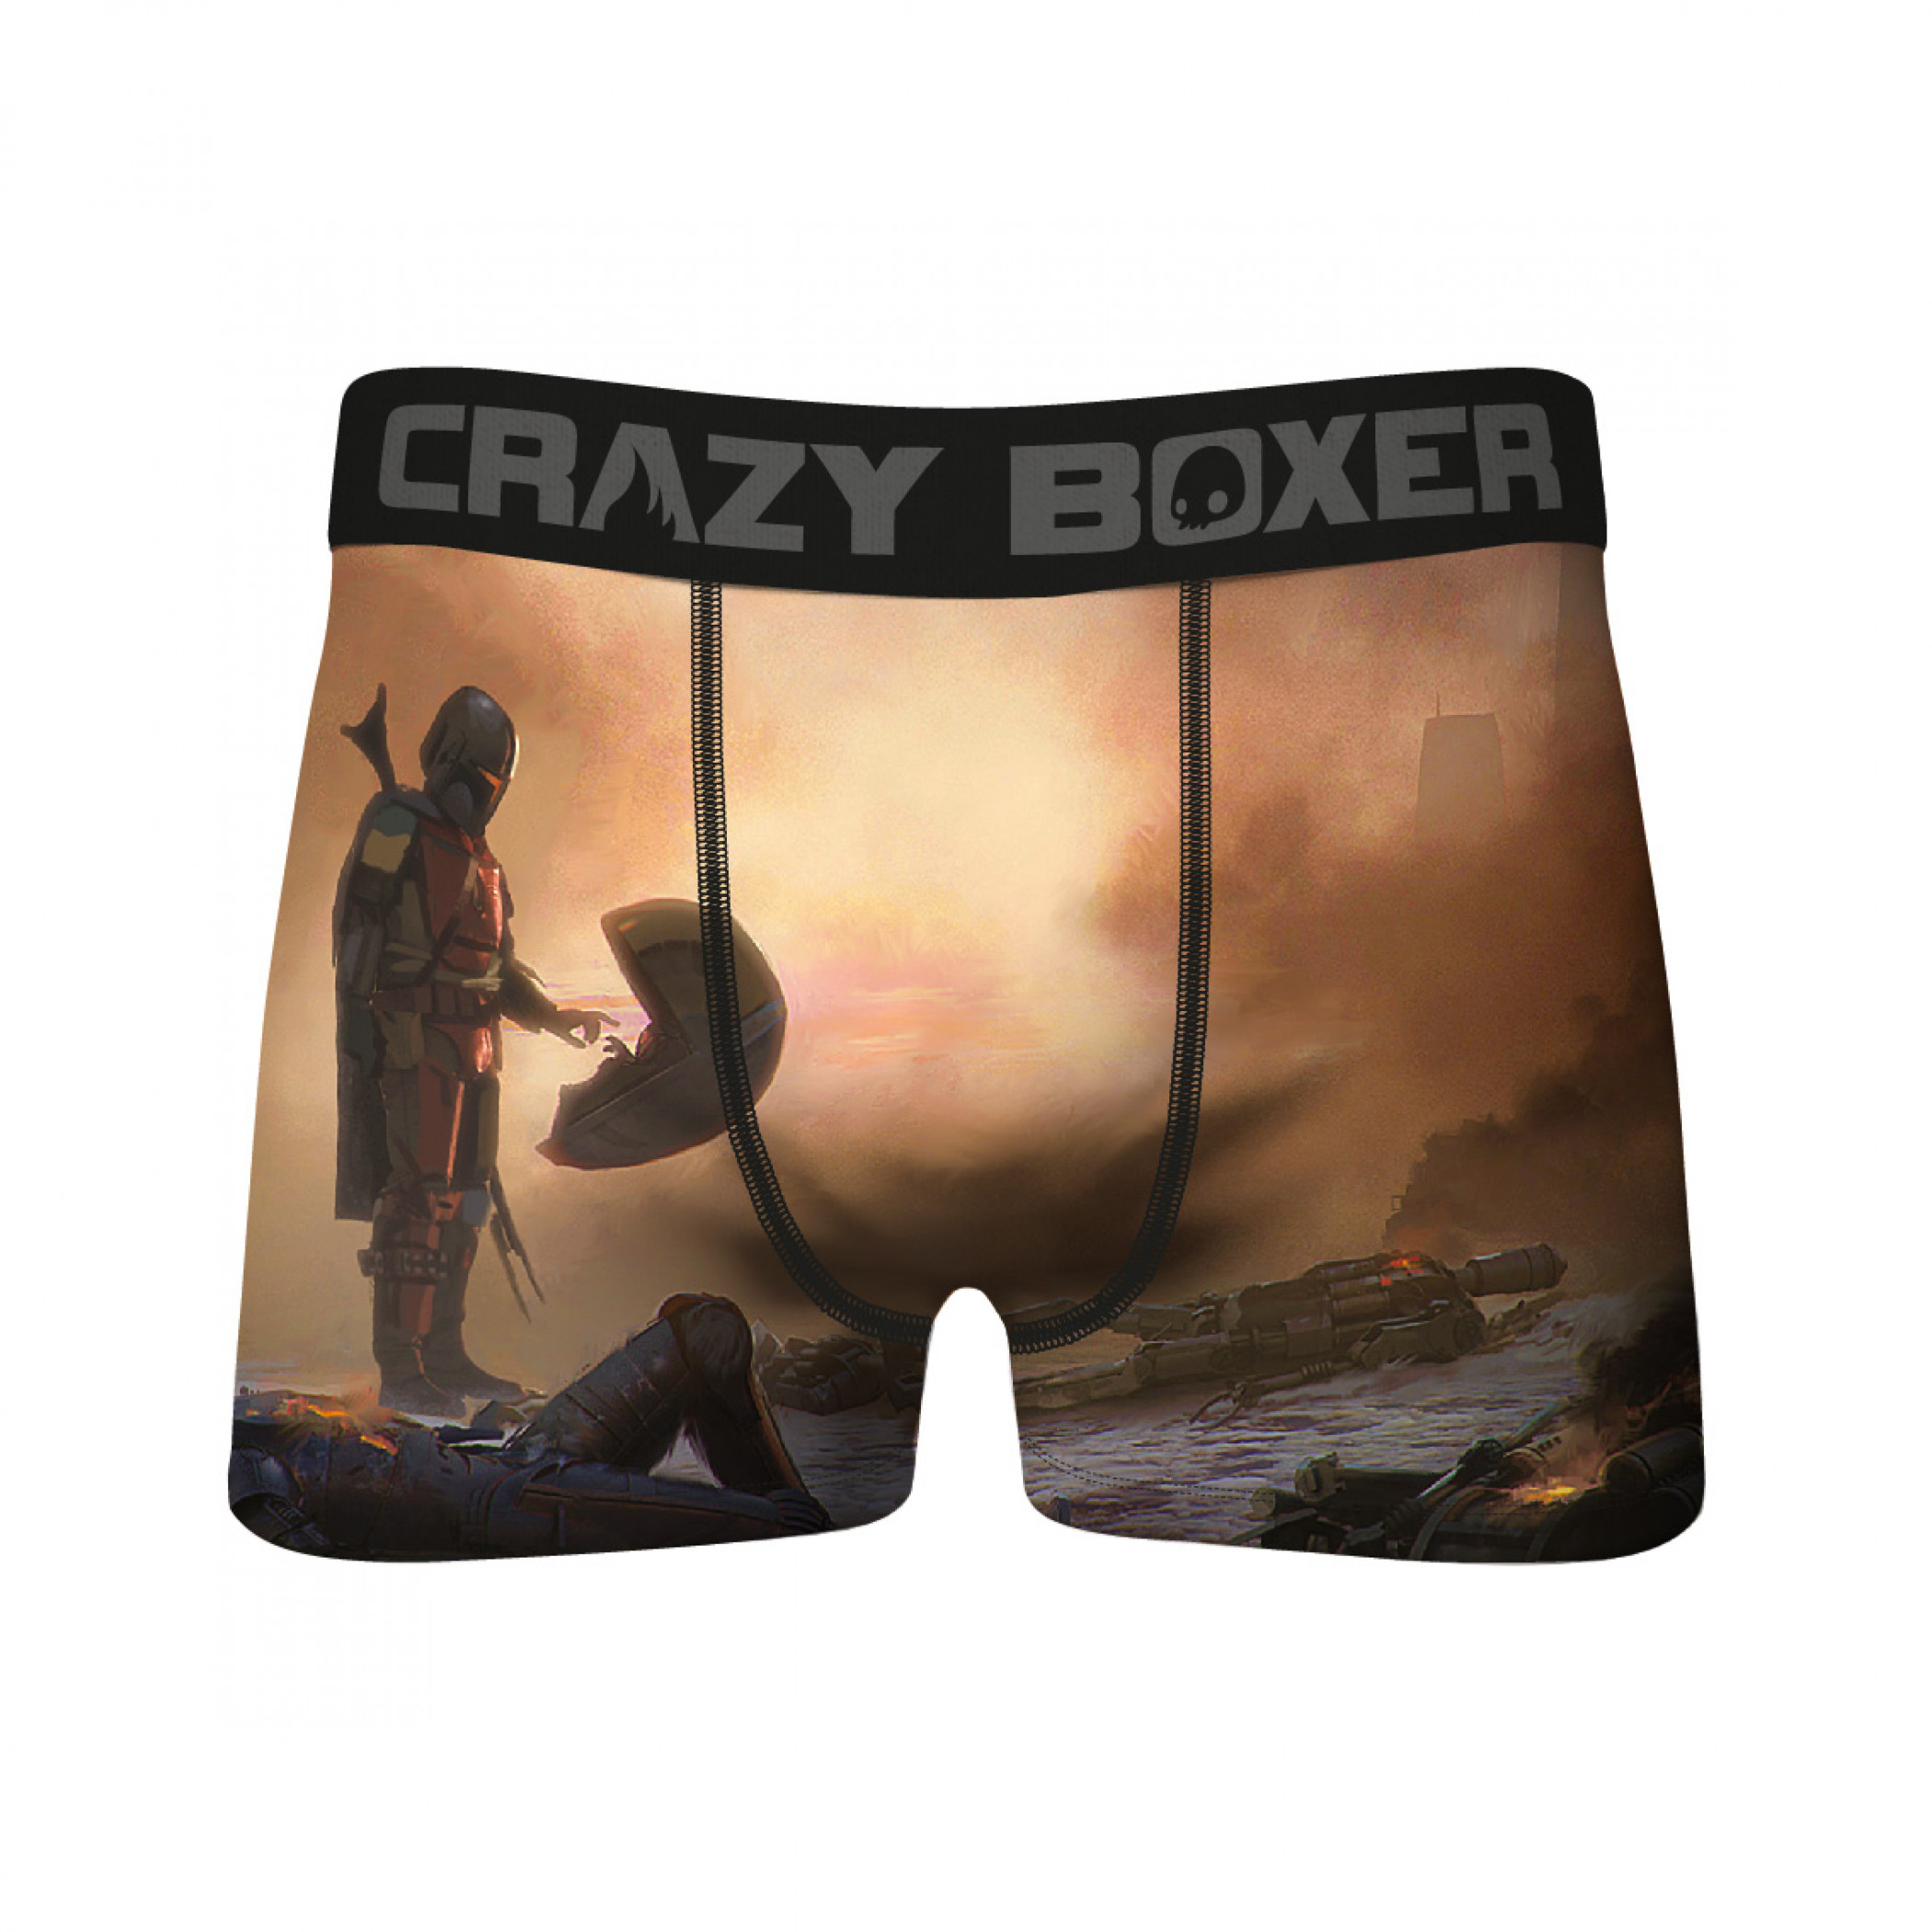 Star Wars Meeting The Child & Mandalorian Helmets All Over Print 2-Pack of Crazy Boxer Briefs